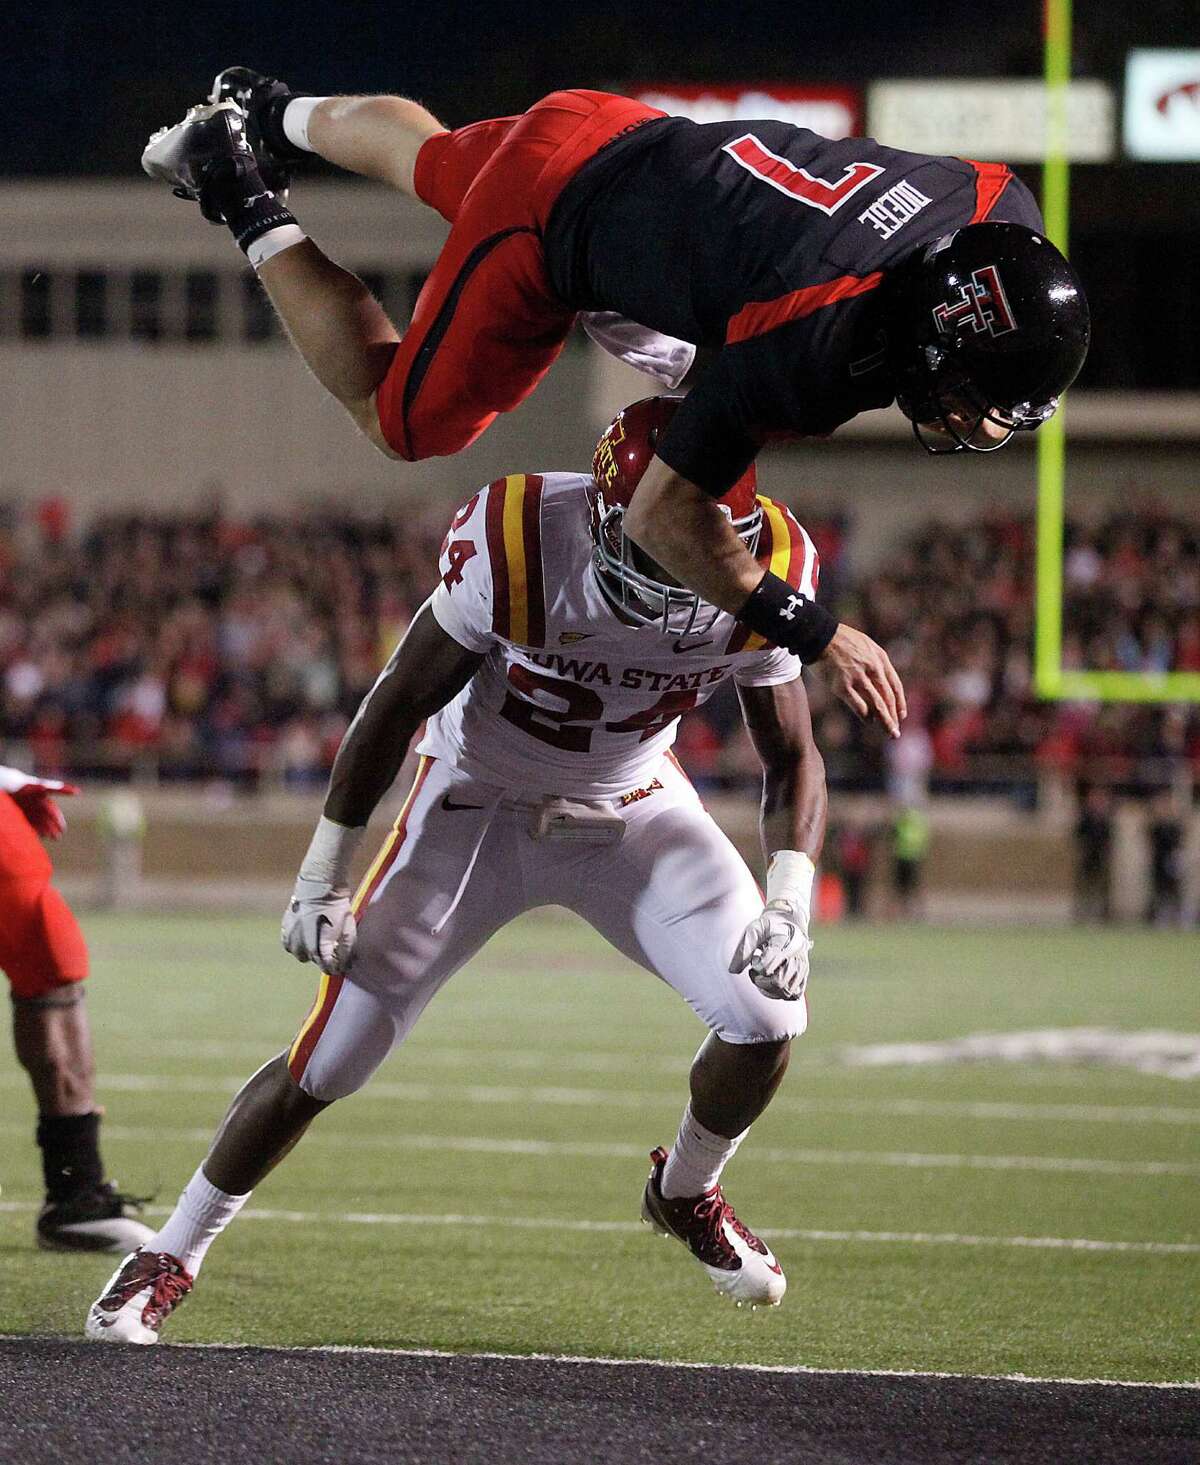 Texas Tech's Seth Doege (7) dives for a touchdown over Iowa State's Durrell Givens (24) during an NCAA college football game, in Lubbock, Texas, Saturday, Oct. 29, 2011. (AP Photo/Lubbock Avalanche-Journal, Stephen Spillman)